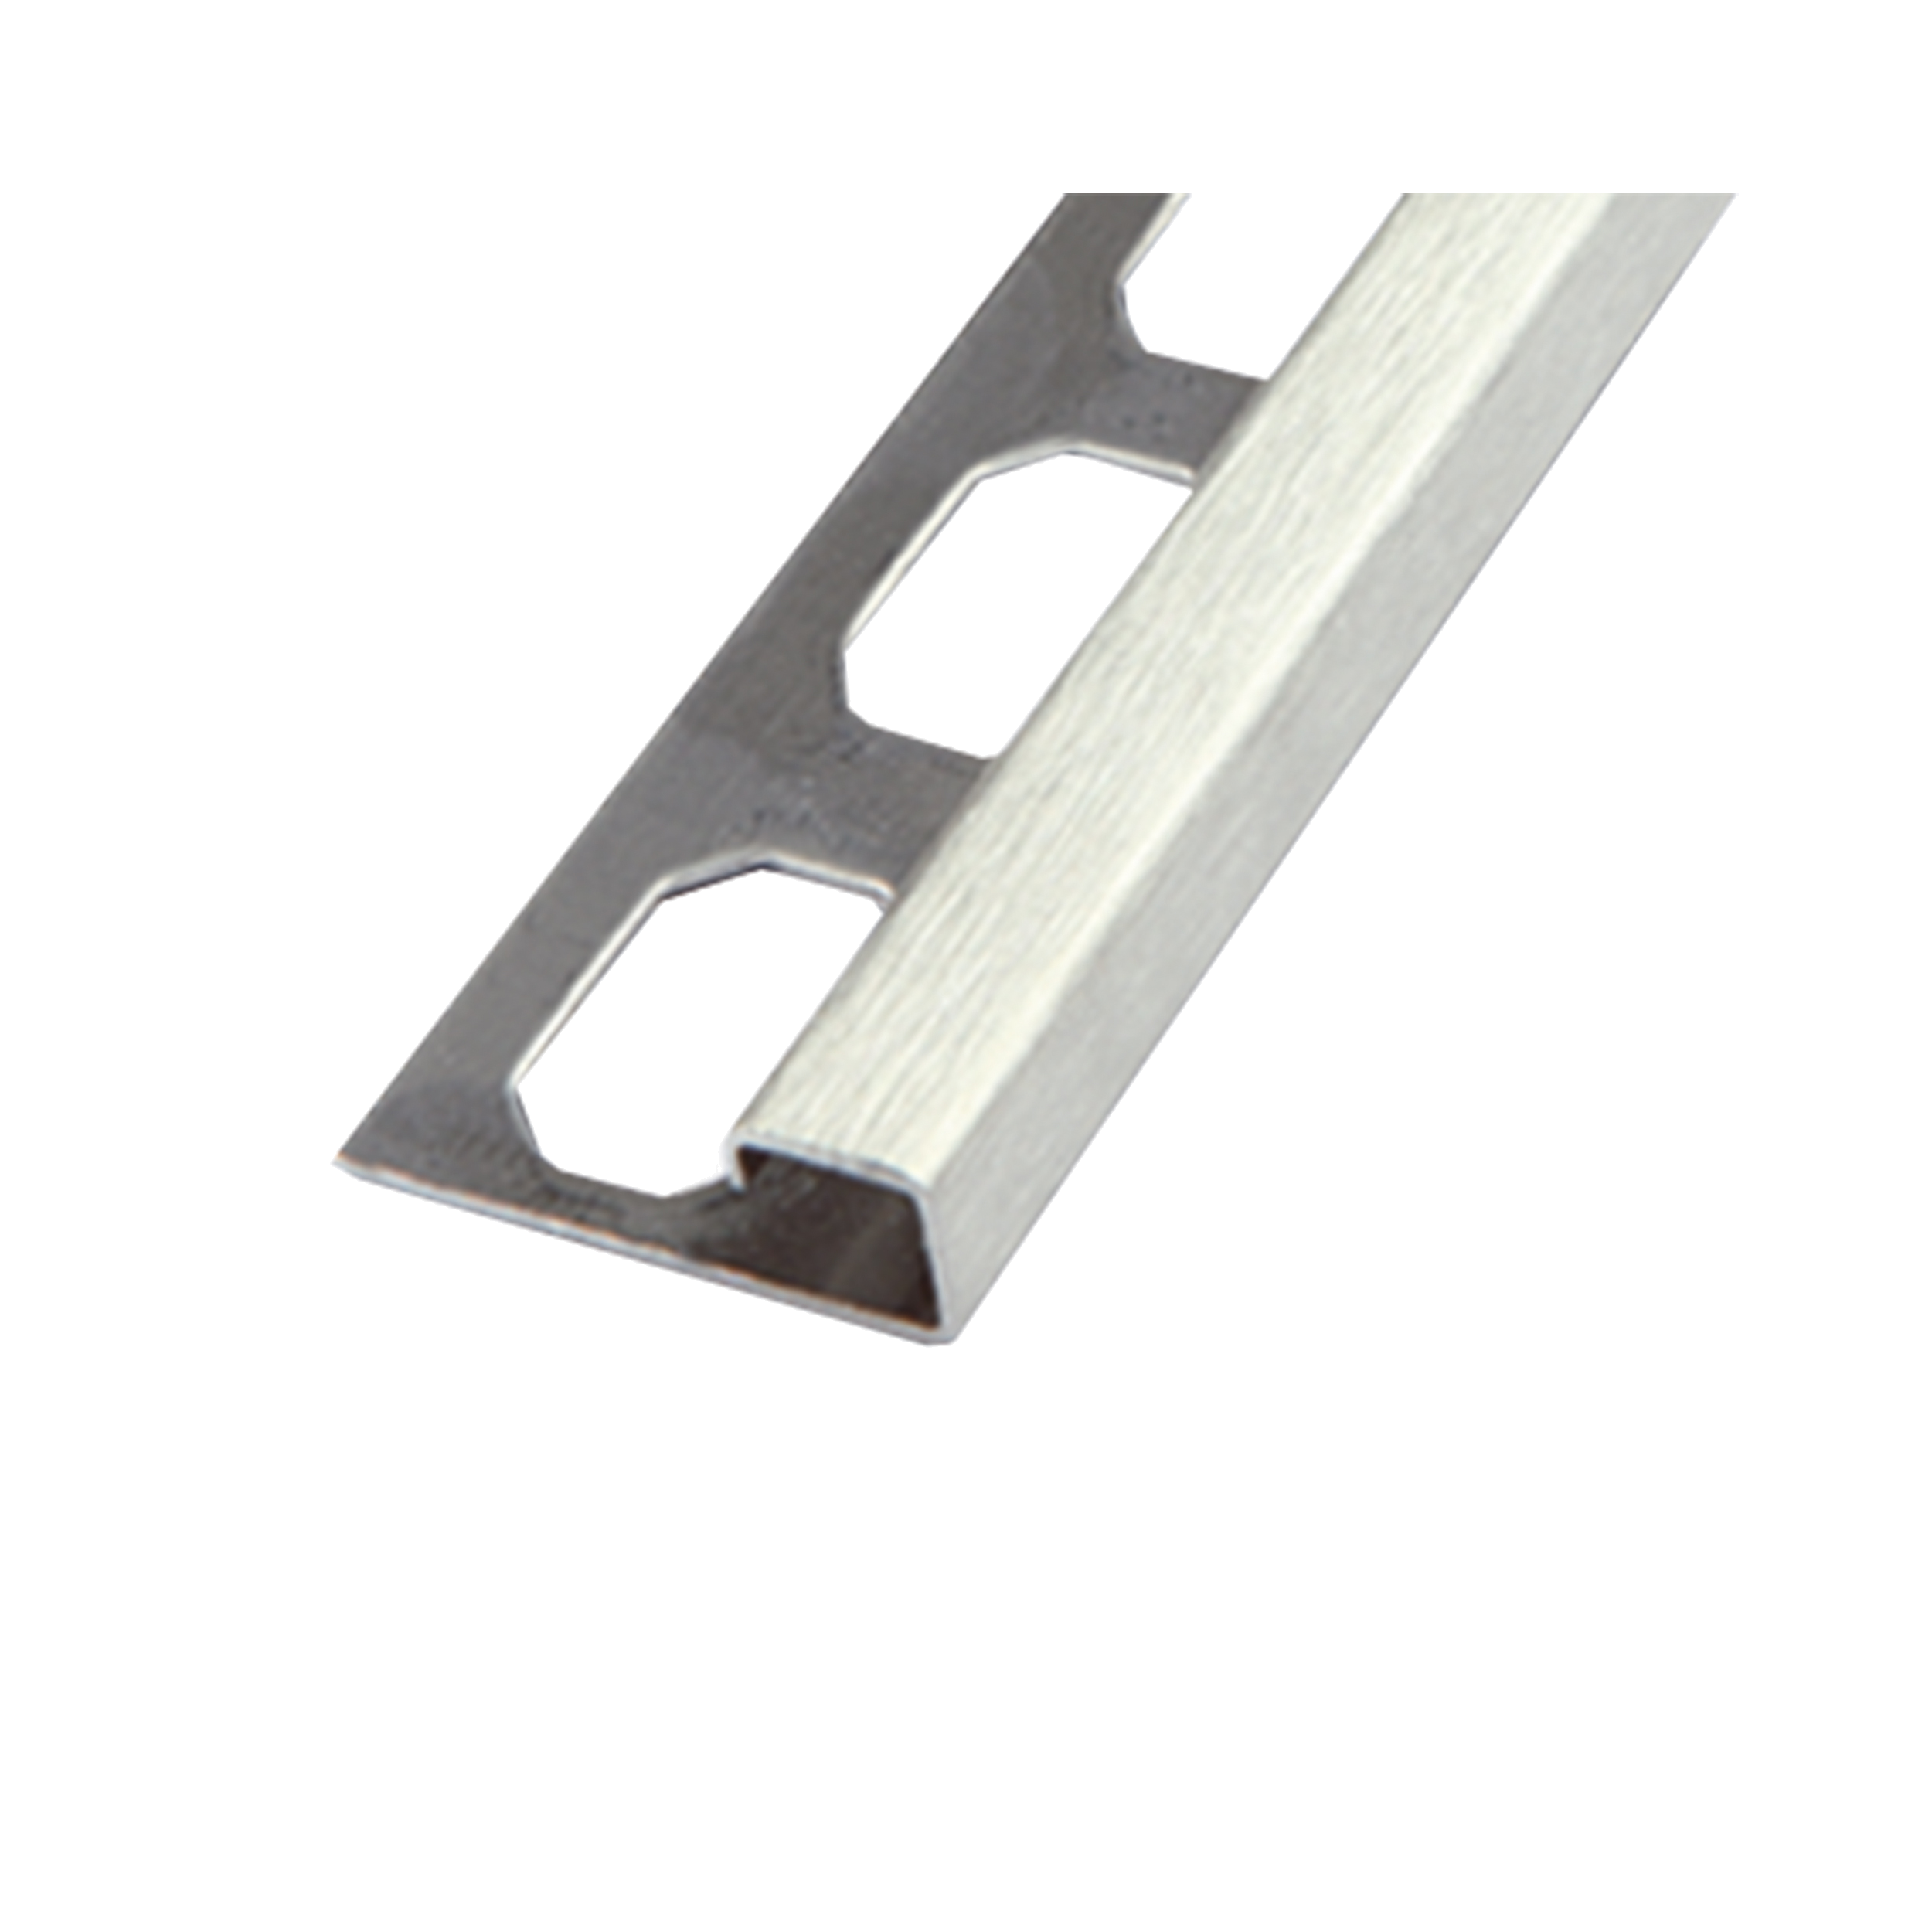 Square Edge Profiles Made of Stainless Steel (SQ5)